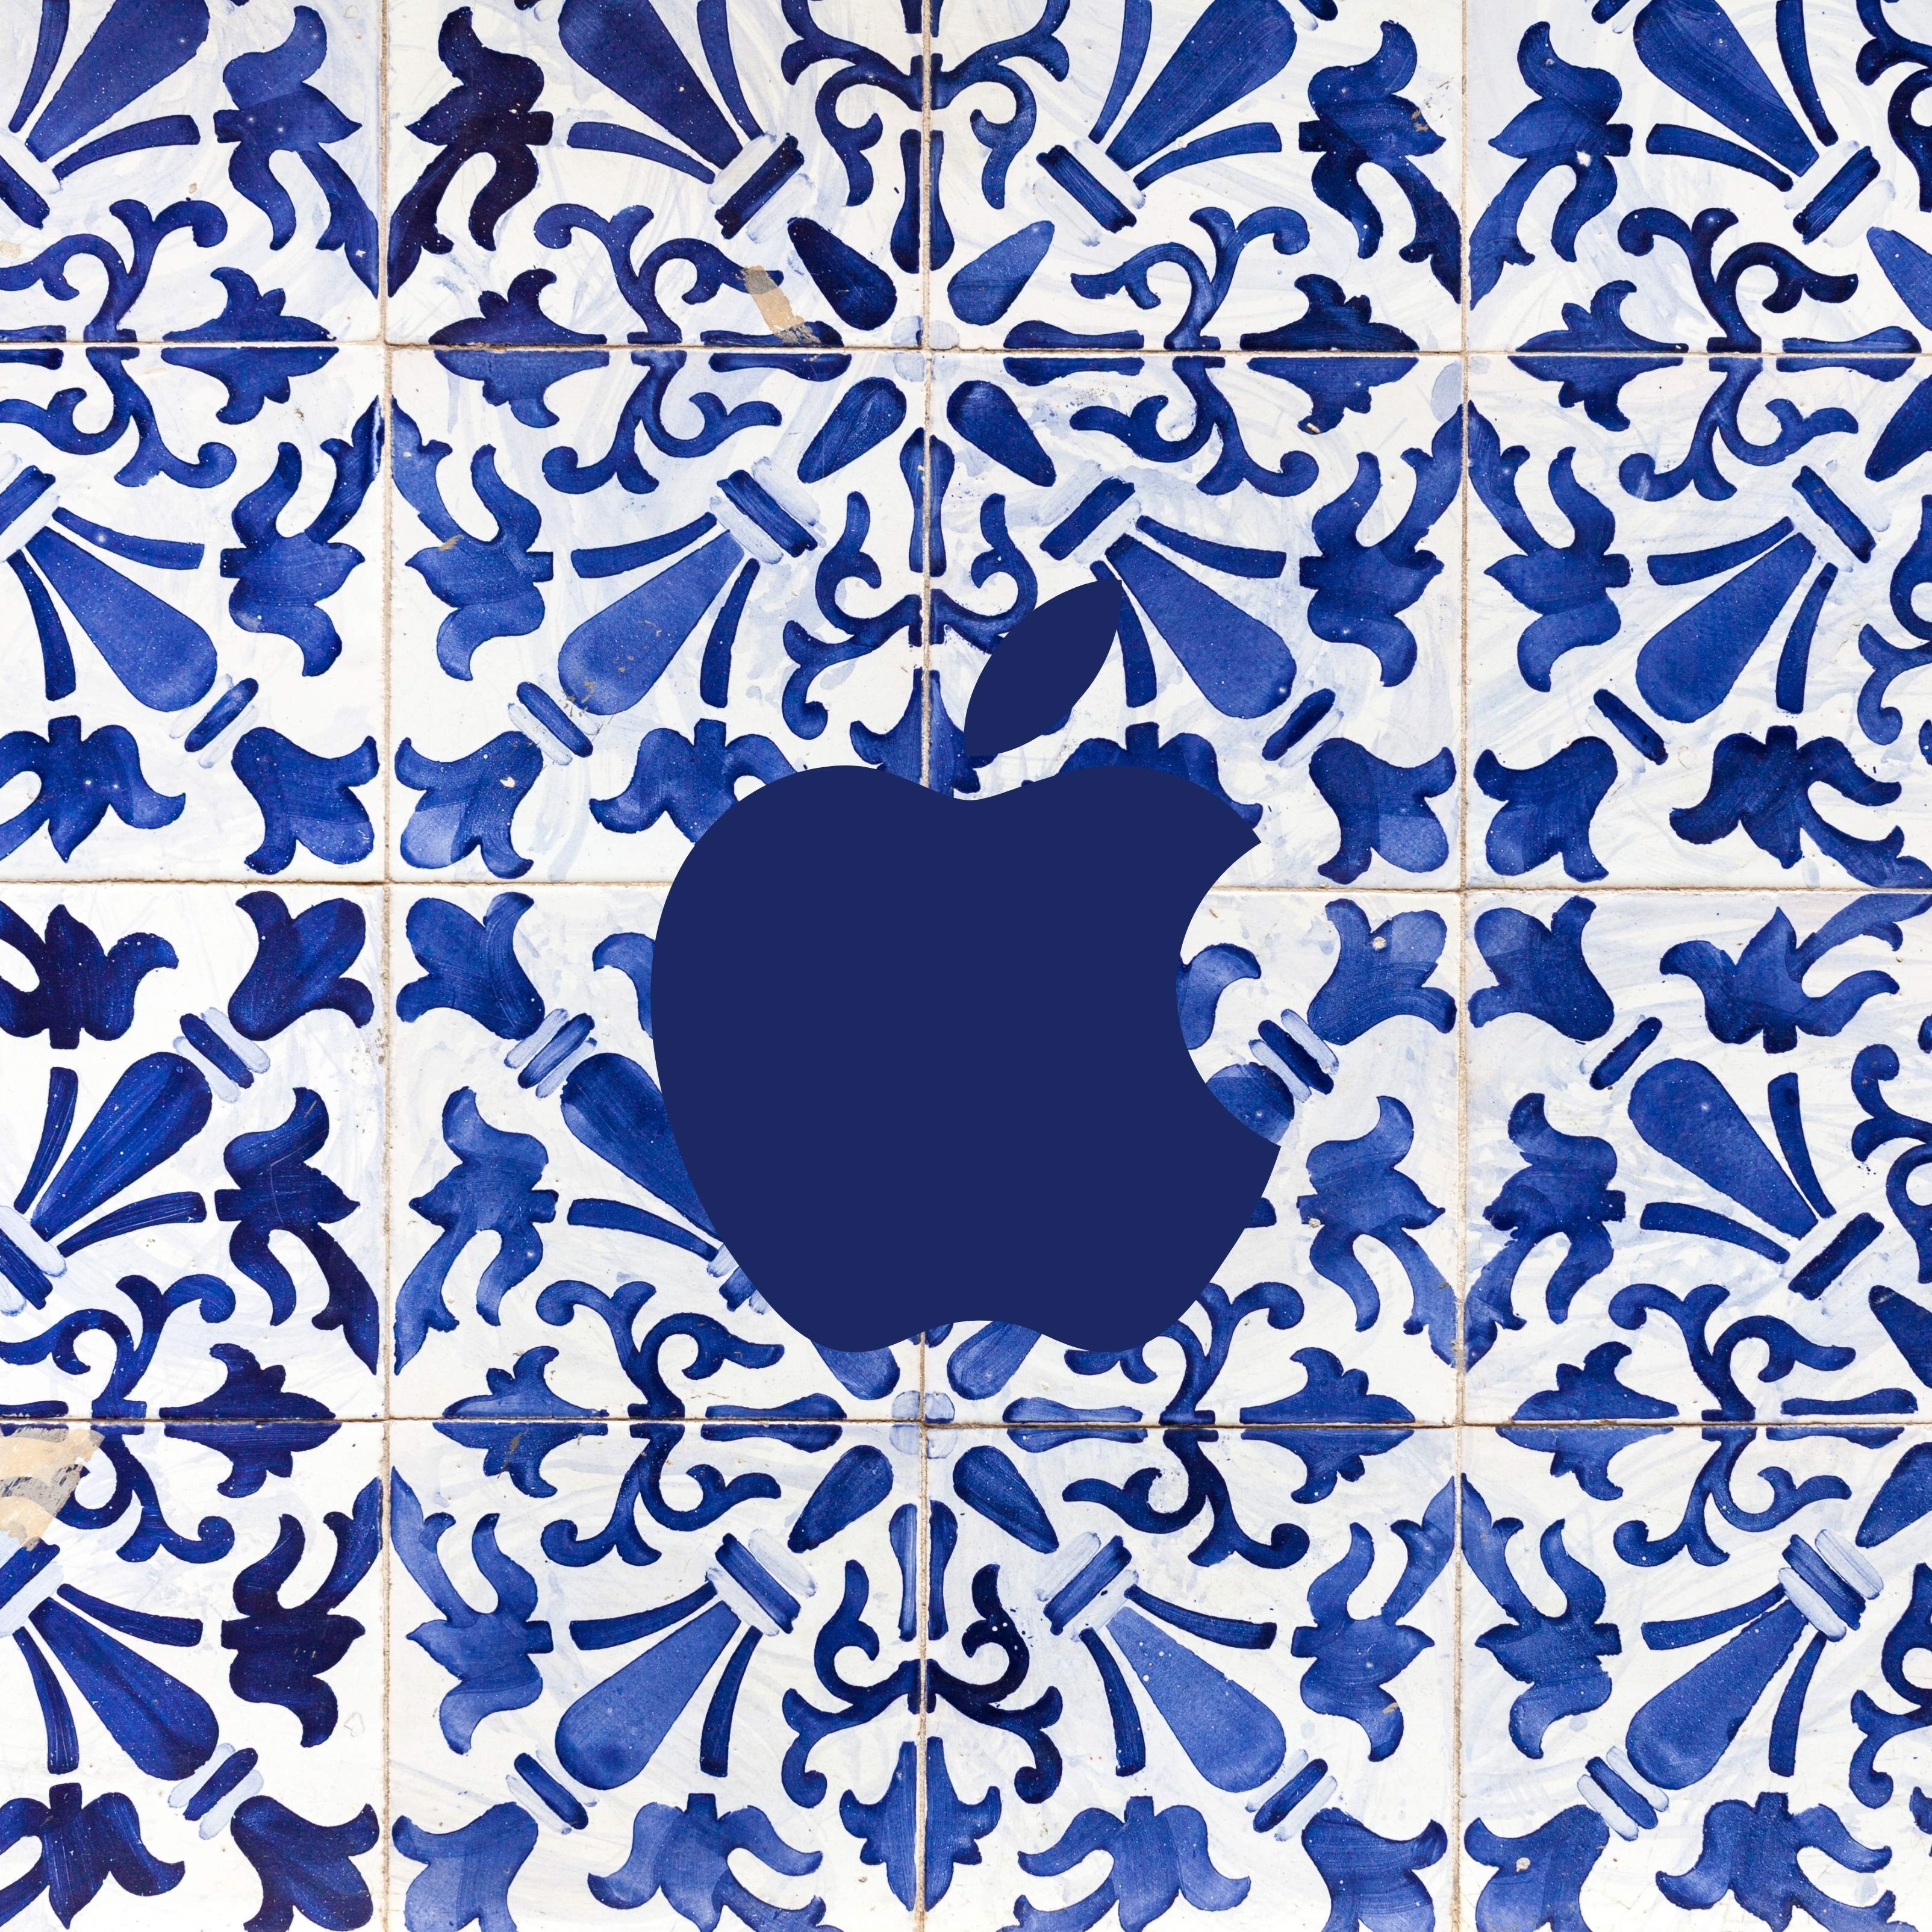 iPad Wallpapers Apple Logo Blue Ancient Texture Background iPad Background 3208x3208 px